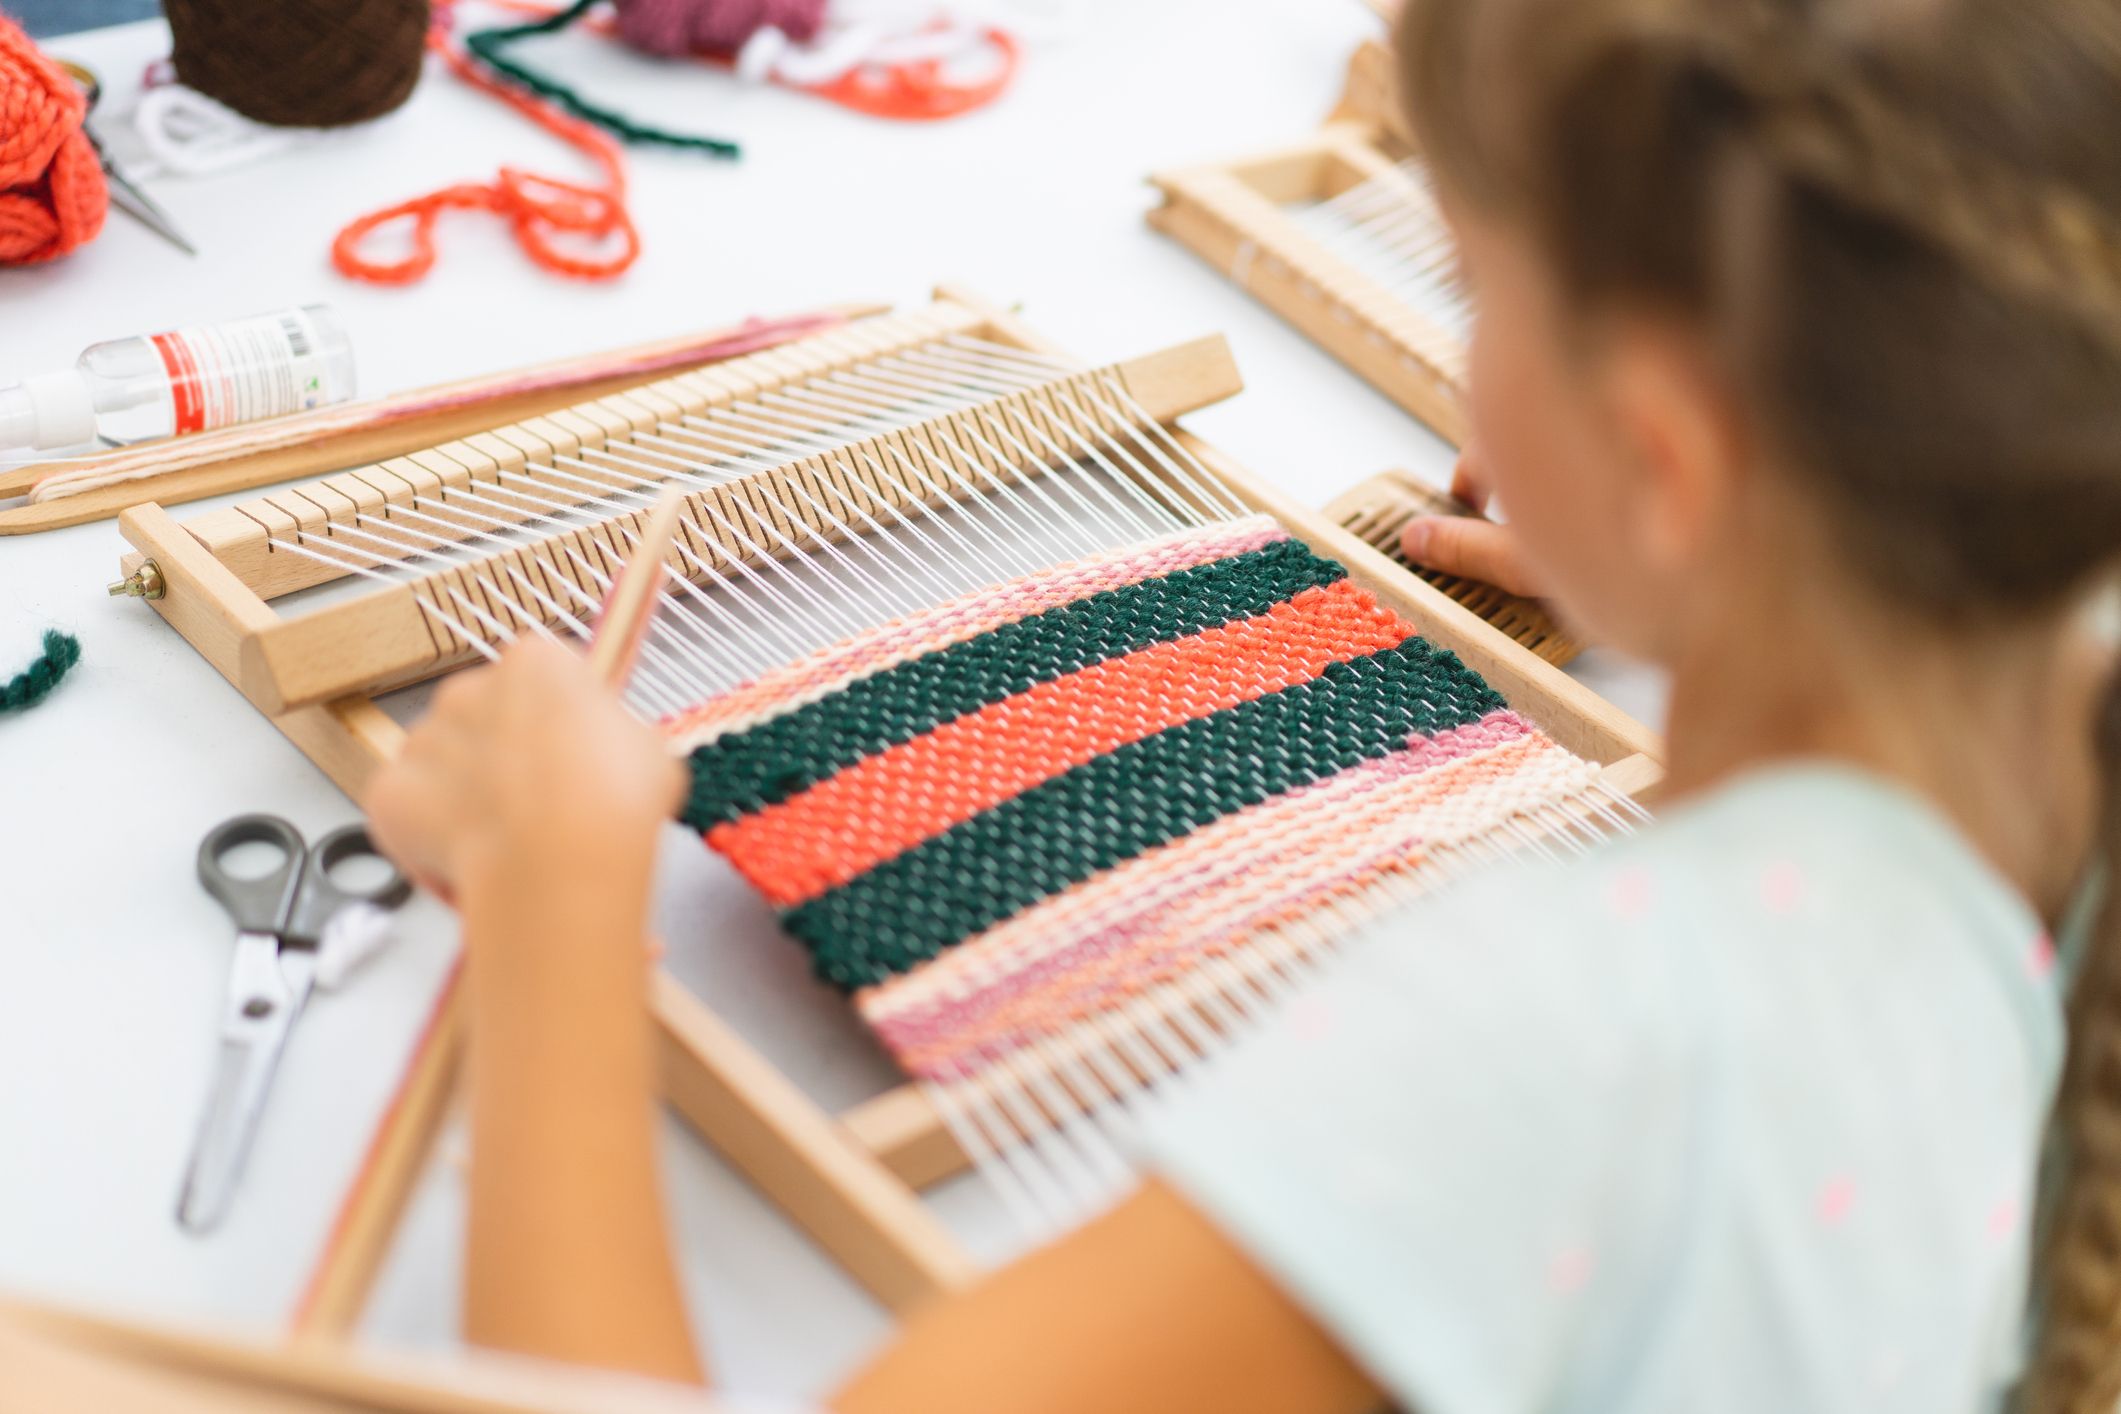 Beginner's guide to lap loom weaving and inspiration for your projects